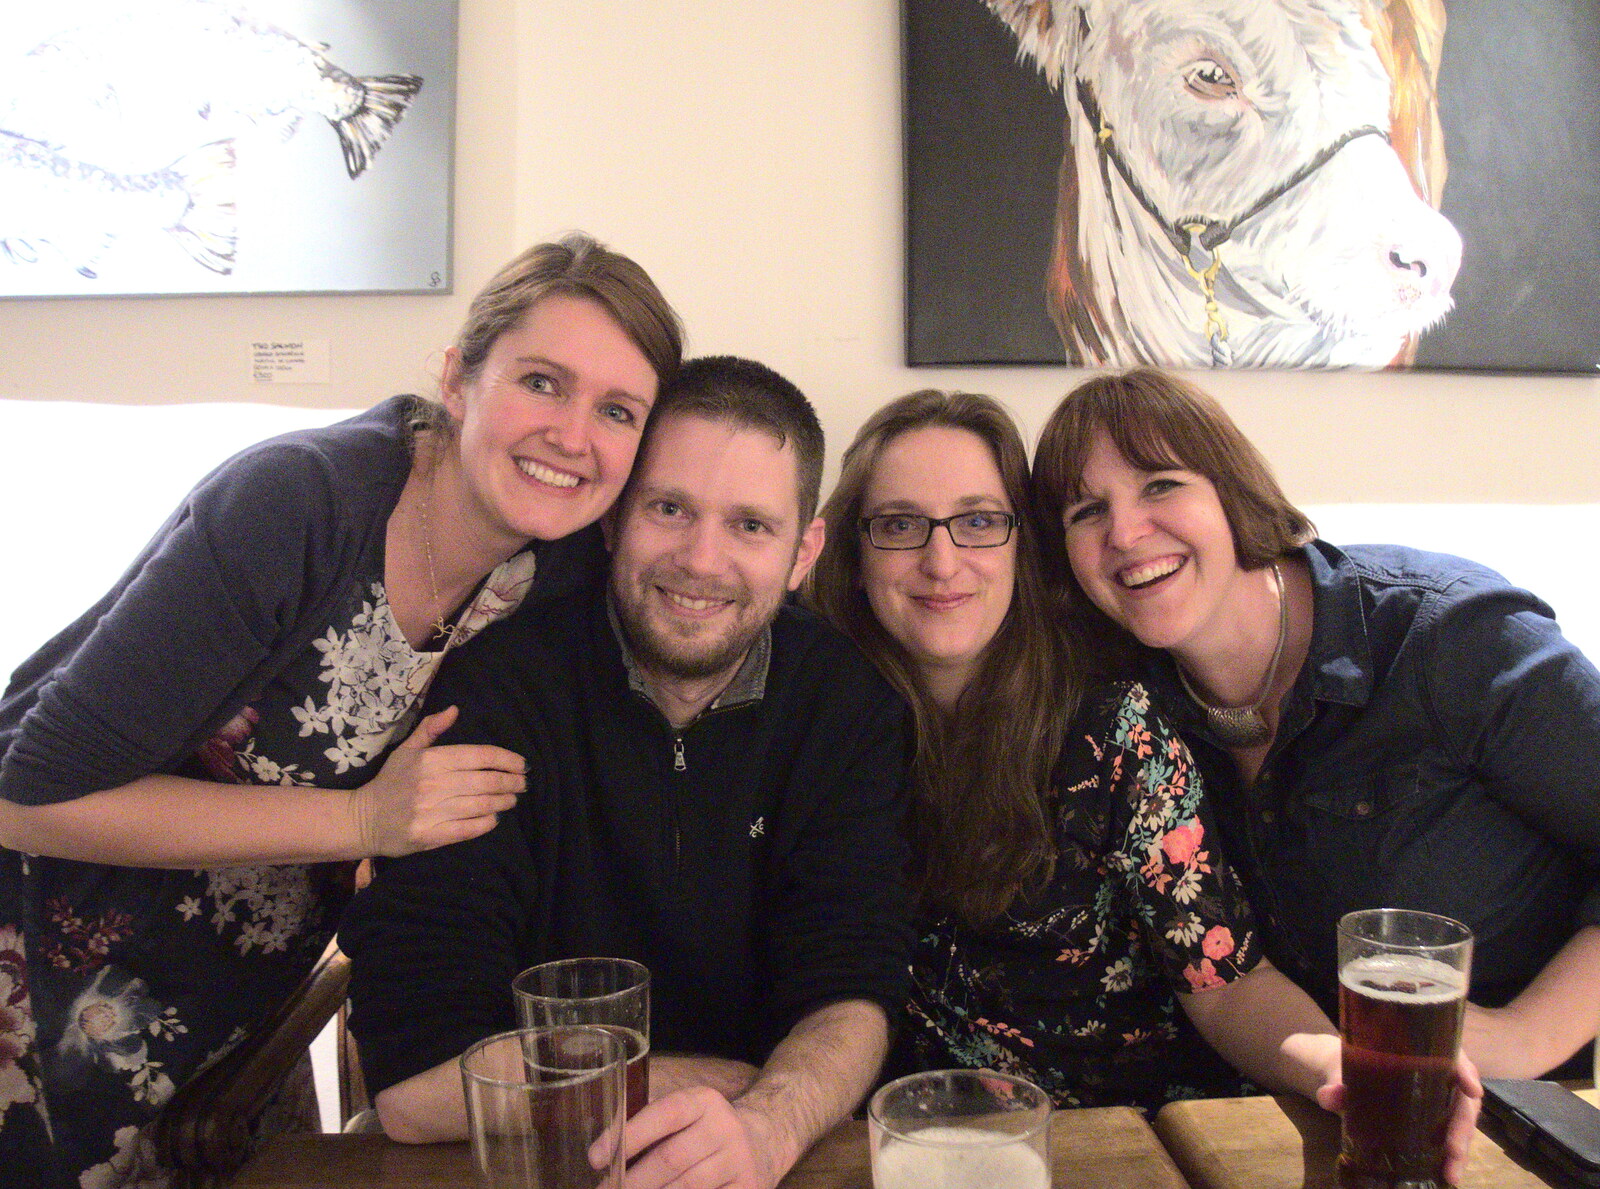 The NYE gang - Isobel, The Boy Phil, Suey and Sarah from New Year's Eve, The Oaksmere, Brome, Suffolk - 31st December 2016